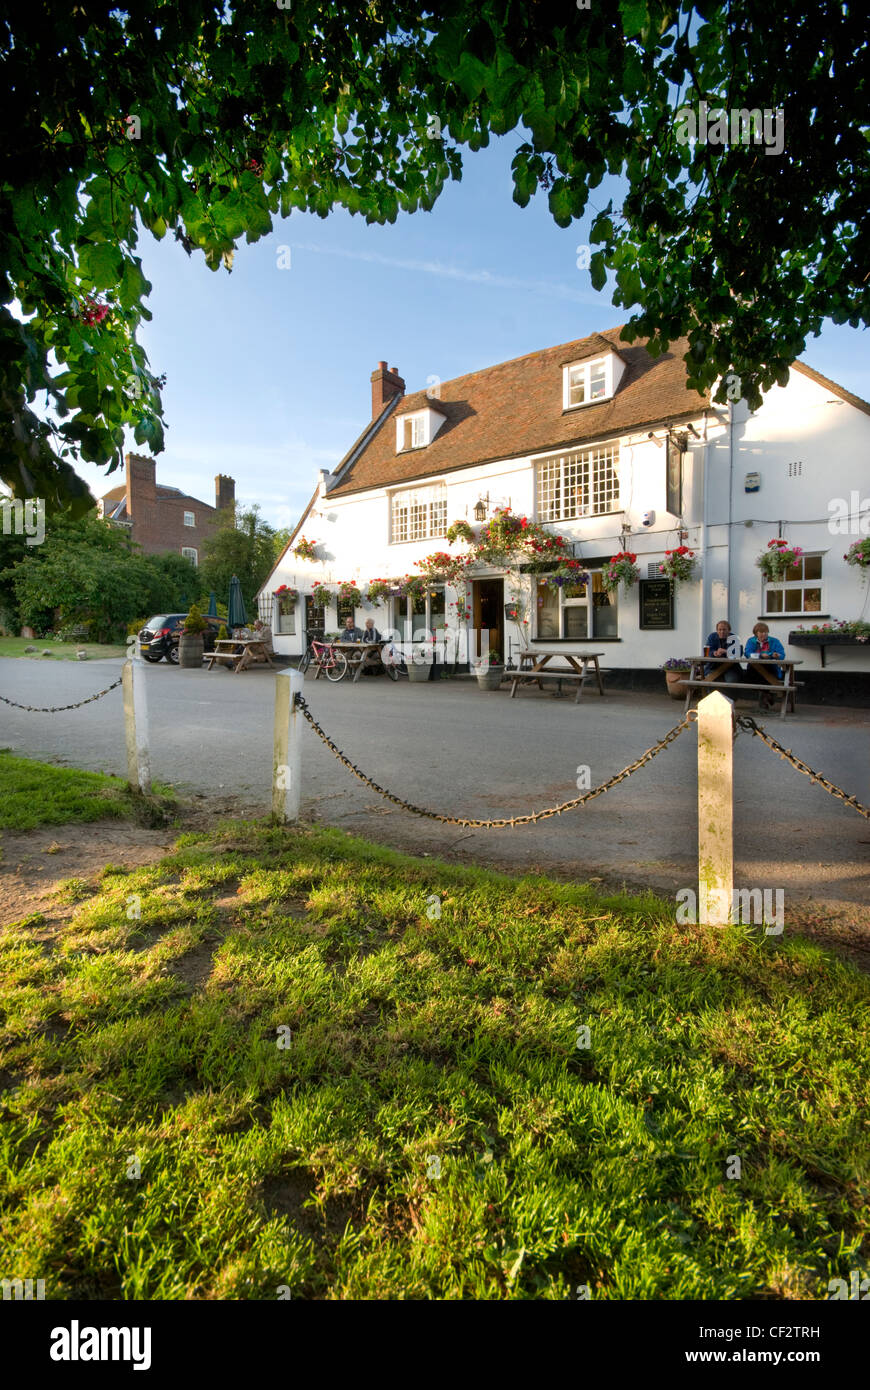 A view of the Rose pub from the village green at Wickhambreux, Kent, England, UK Stock Photo